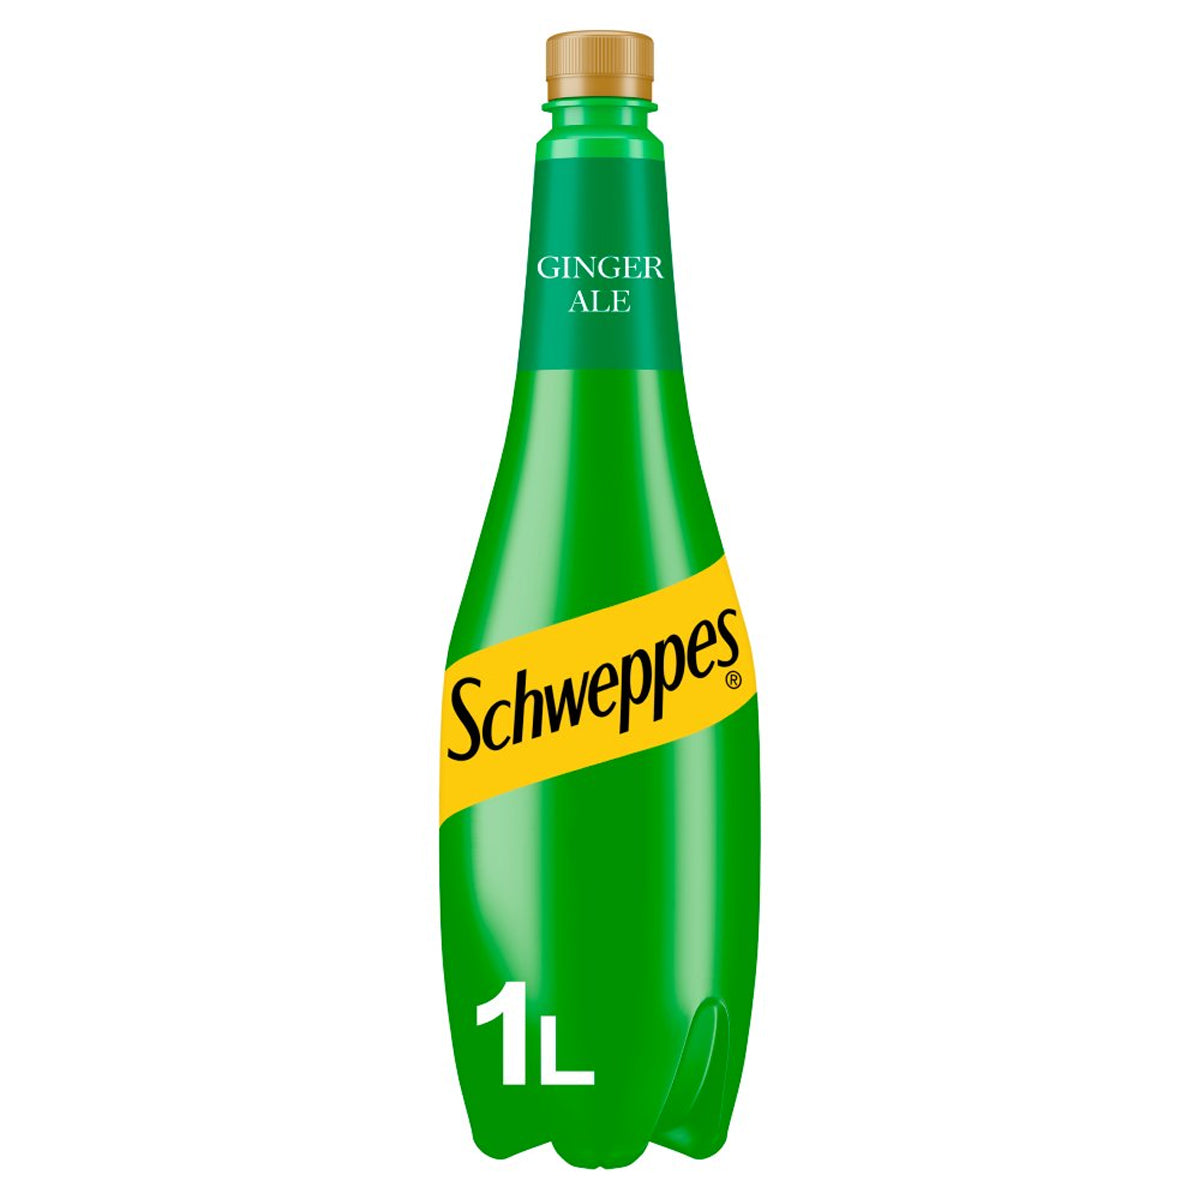 A bottle of Schweppes Canada Dry Ginger Ale - 1L on a white background.